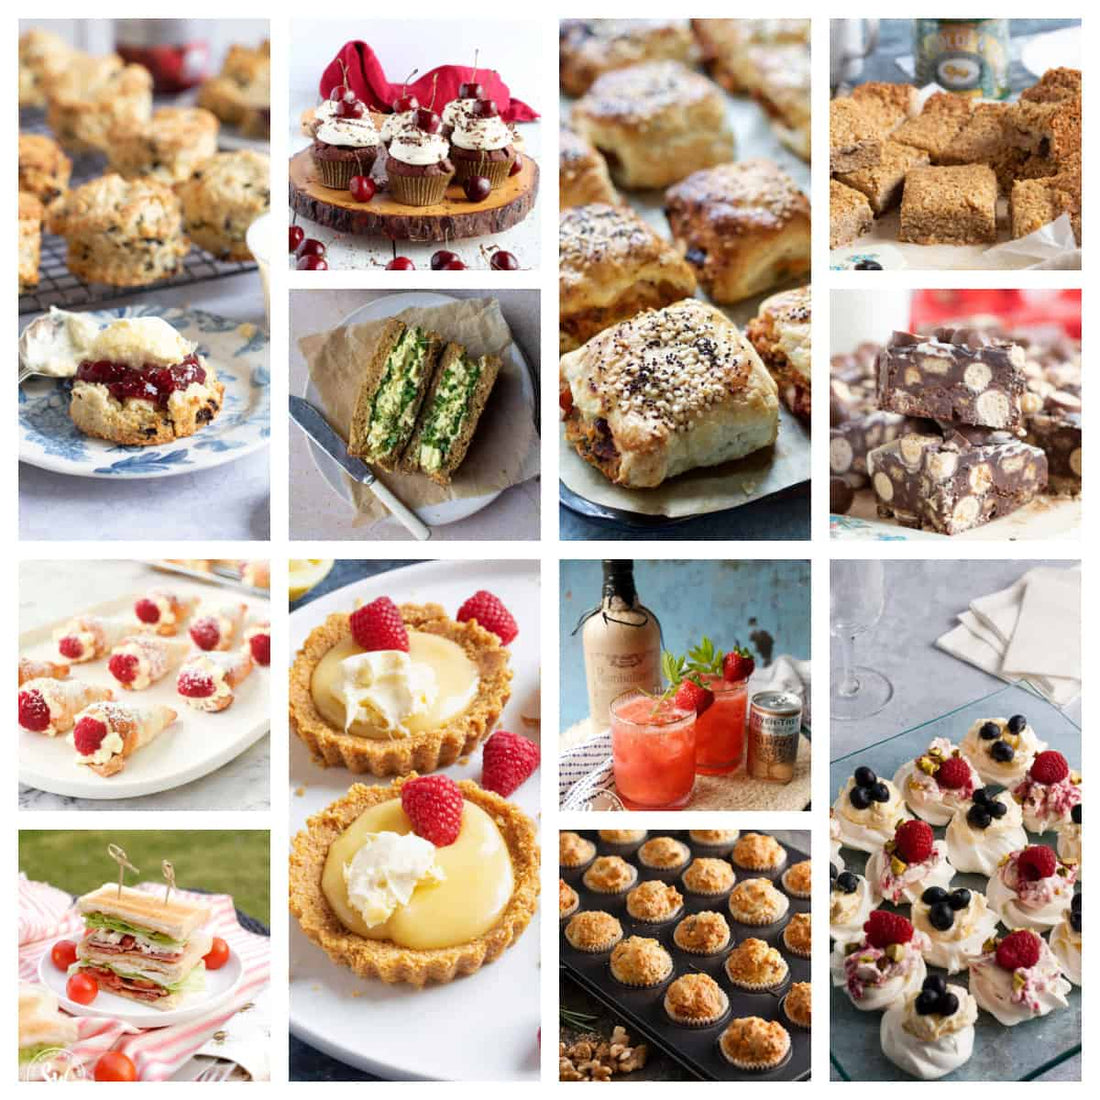 Top 7 Finger Food Ideas for Afternoon Tea